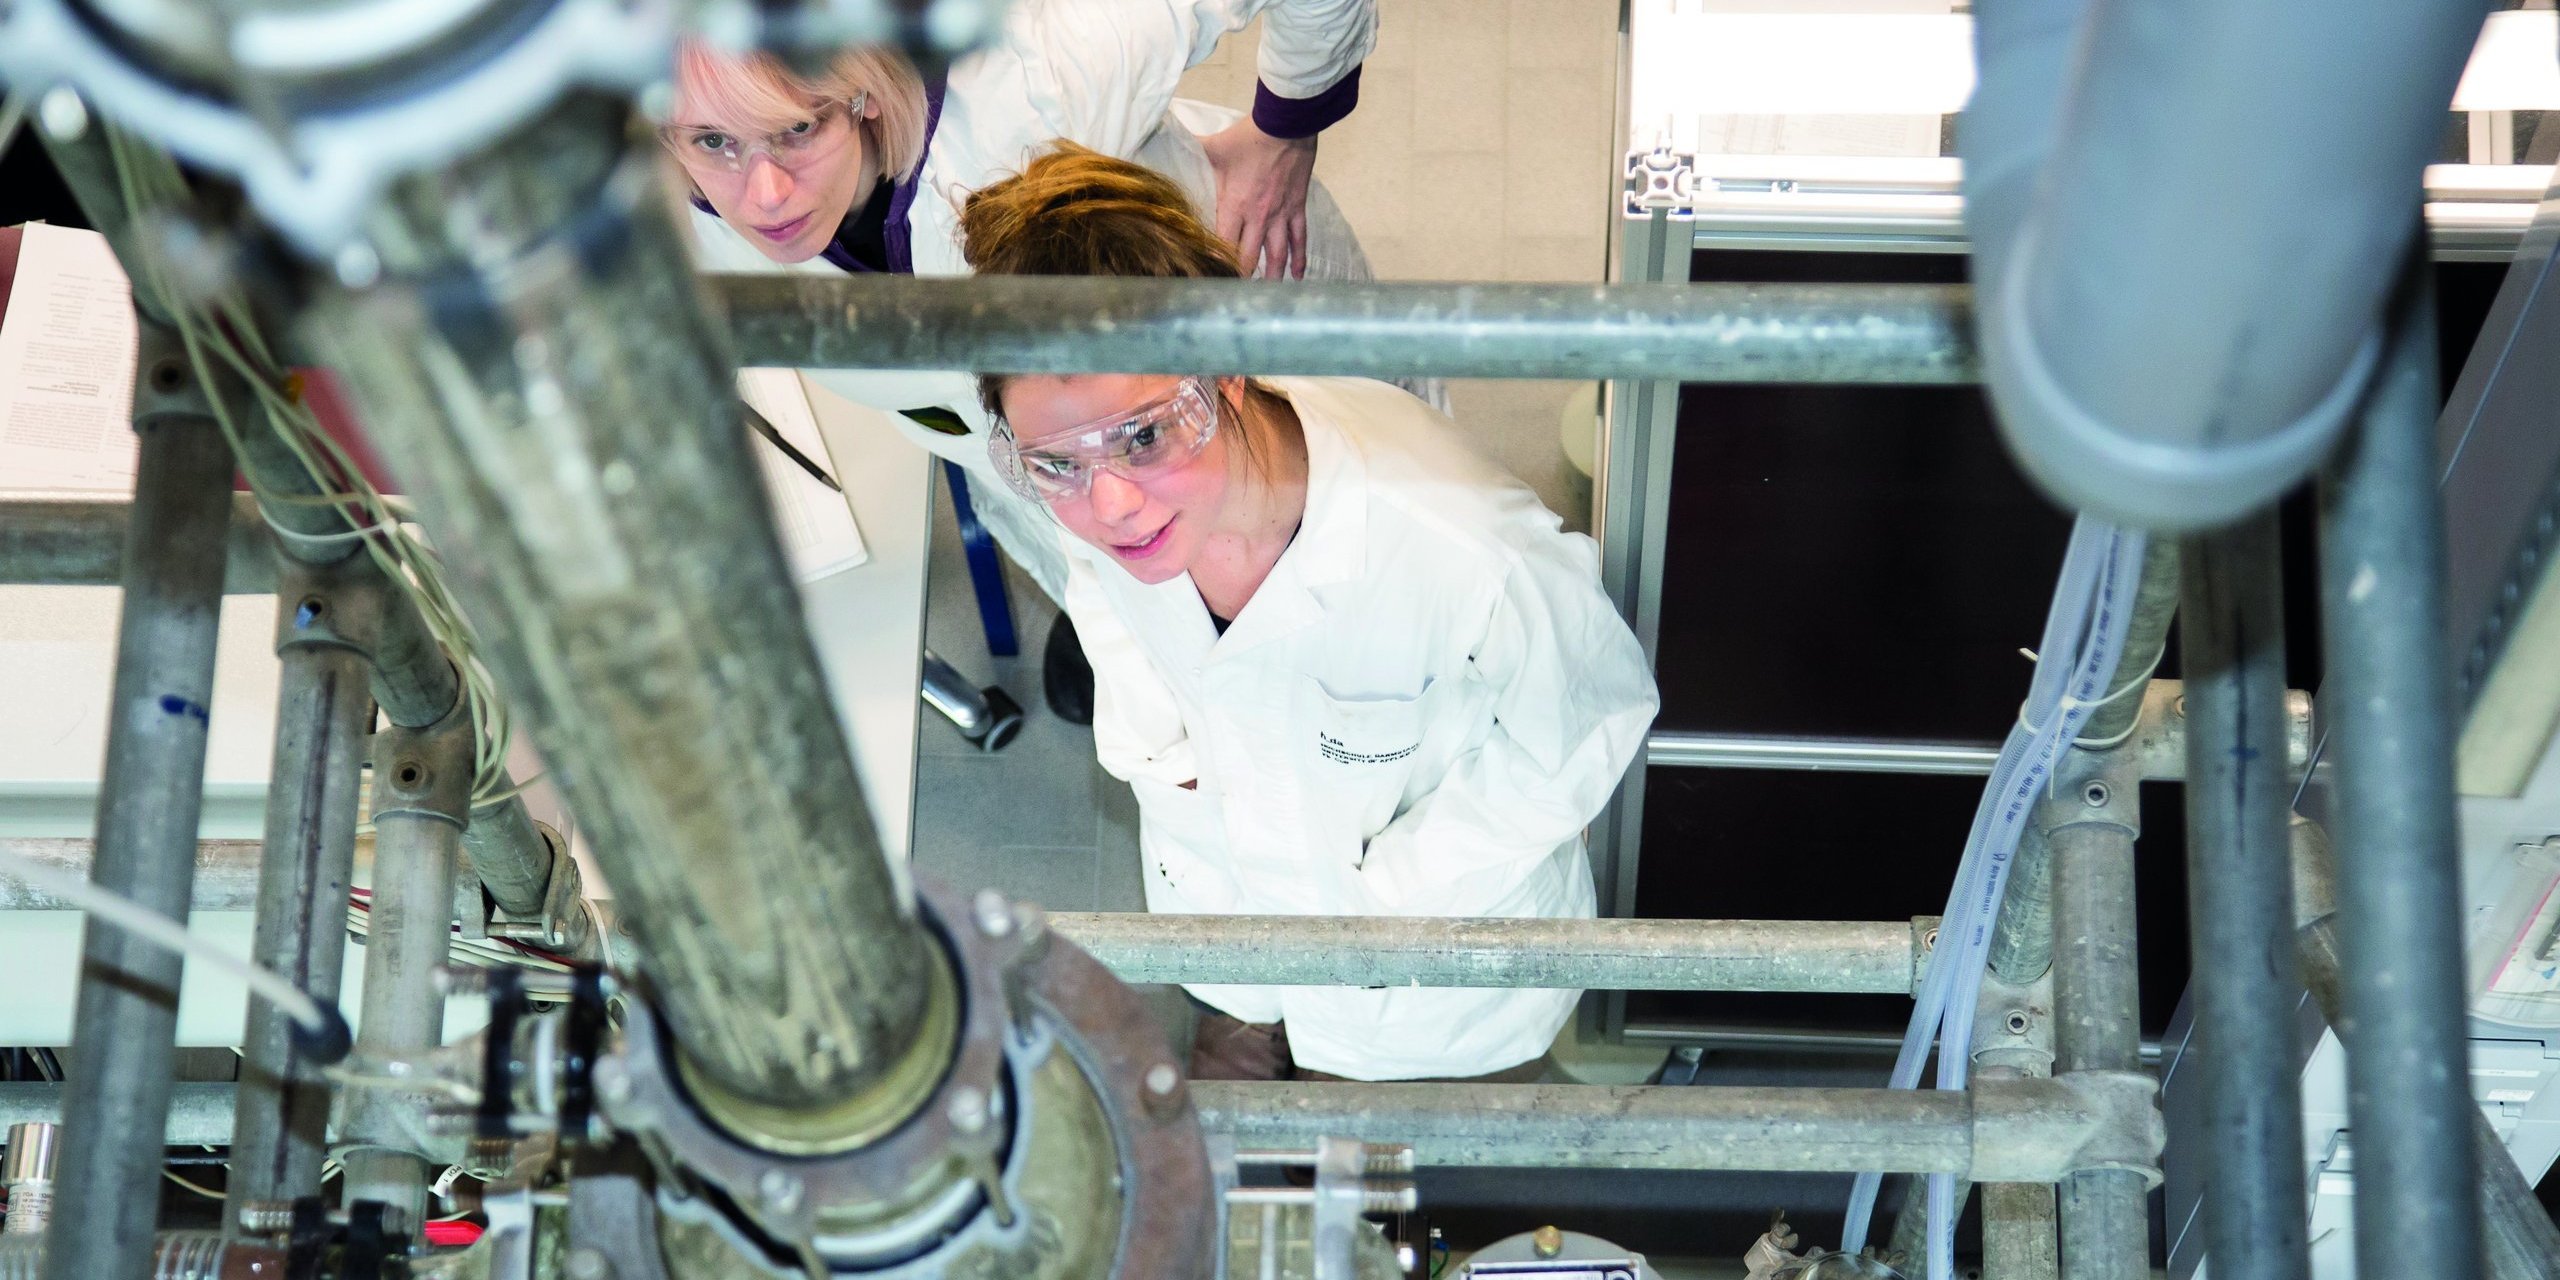 Two people in lab coats with safety goggles look into a plant from below.